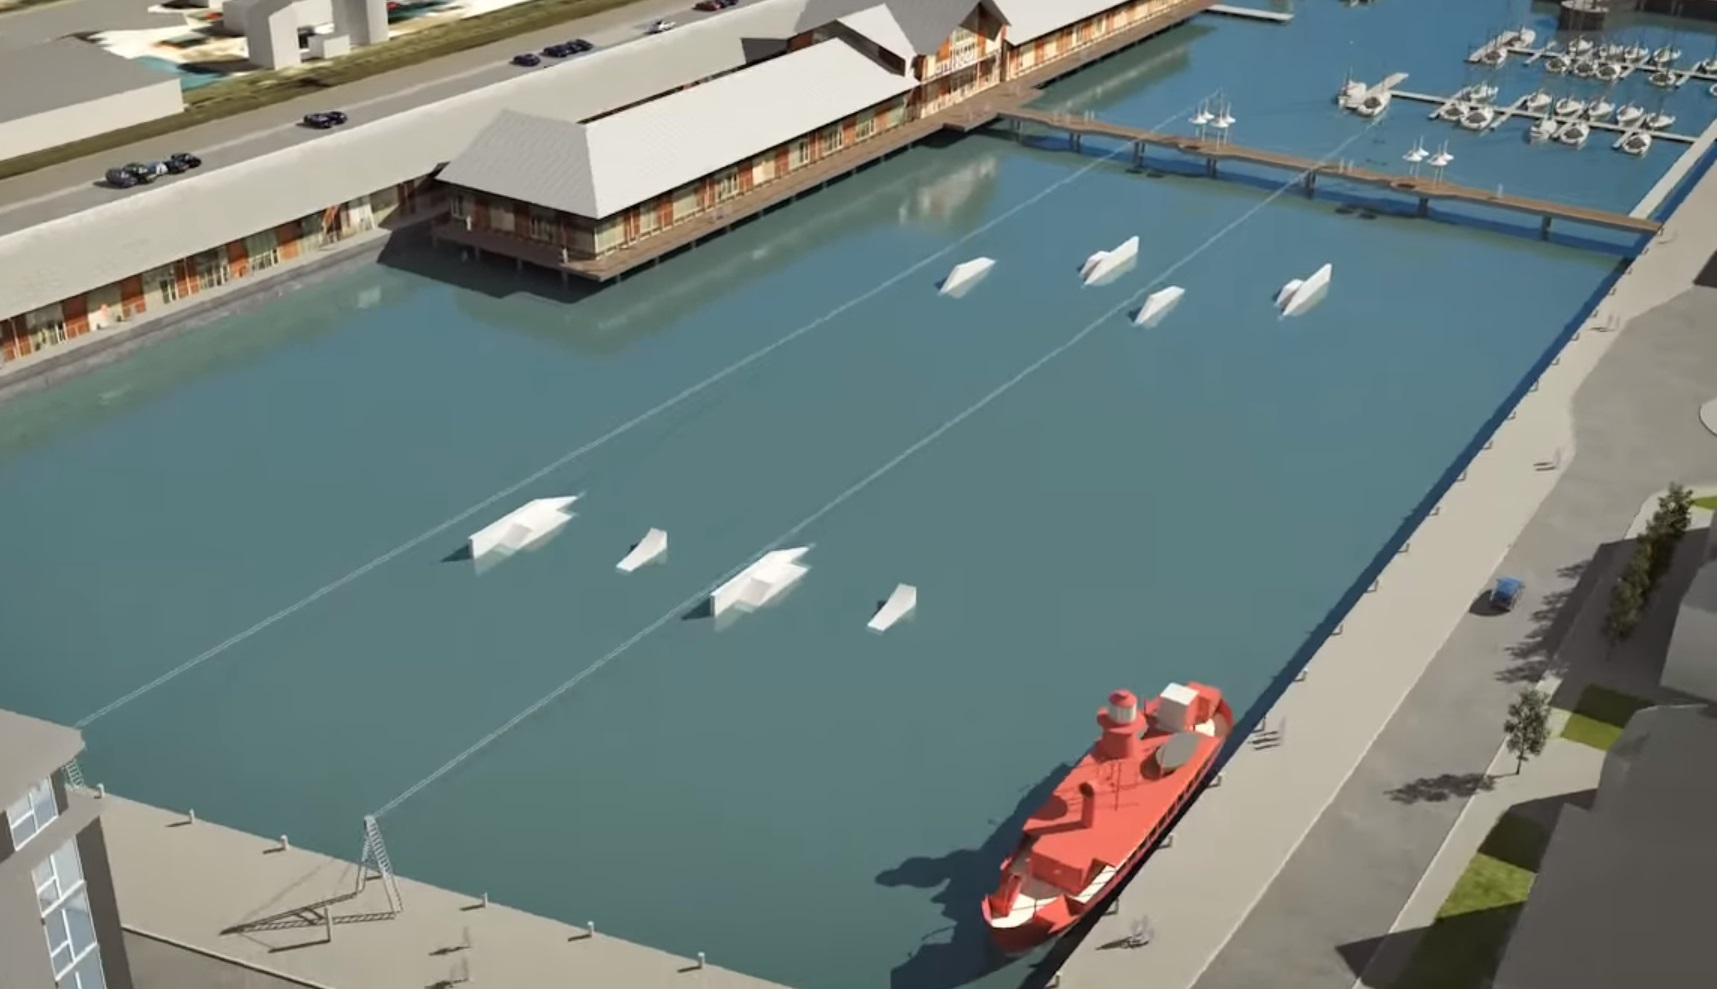 An image from a fly-through video simulation of the waterfront area shows the wakeboarding site.